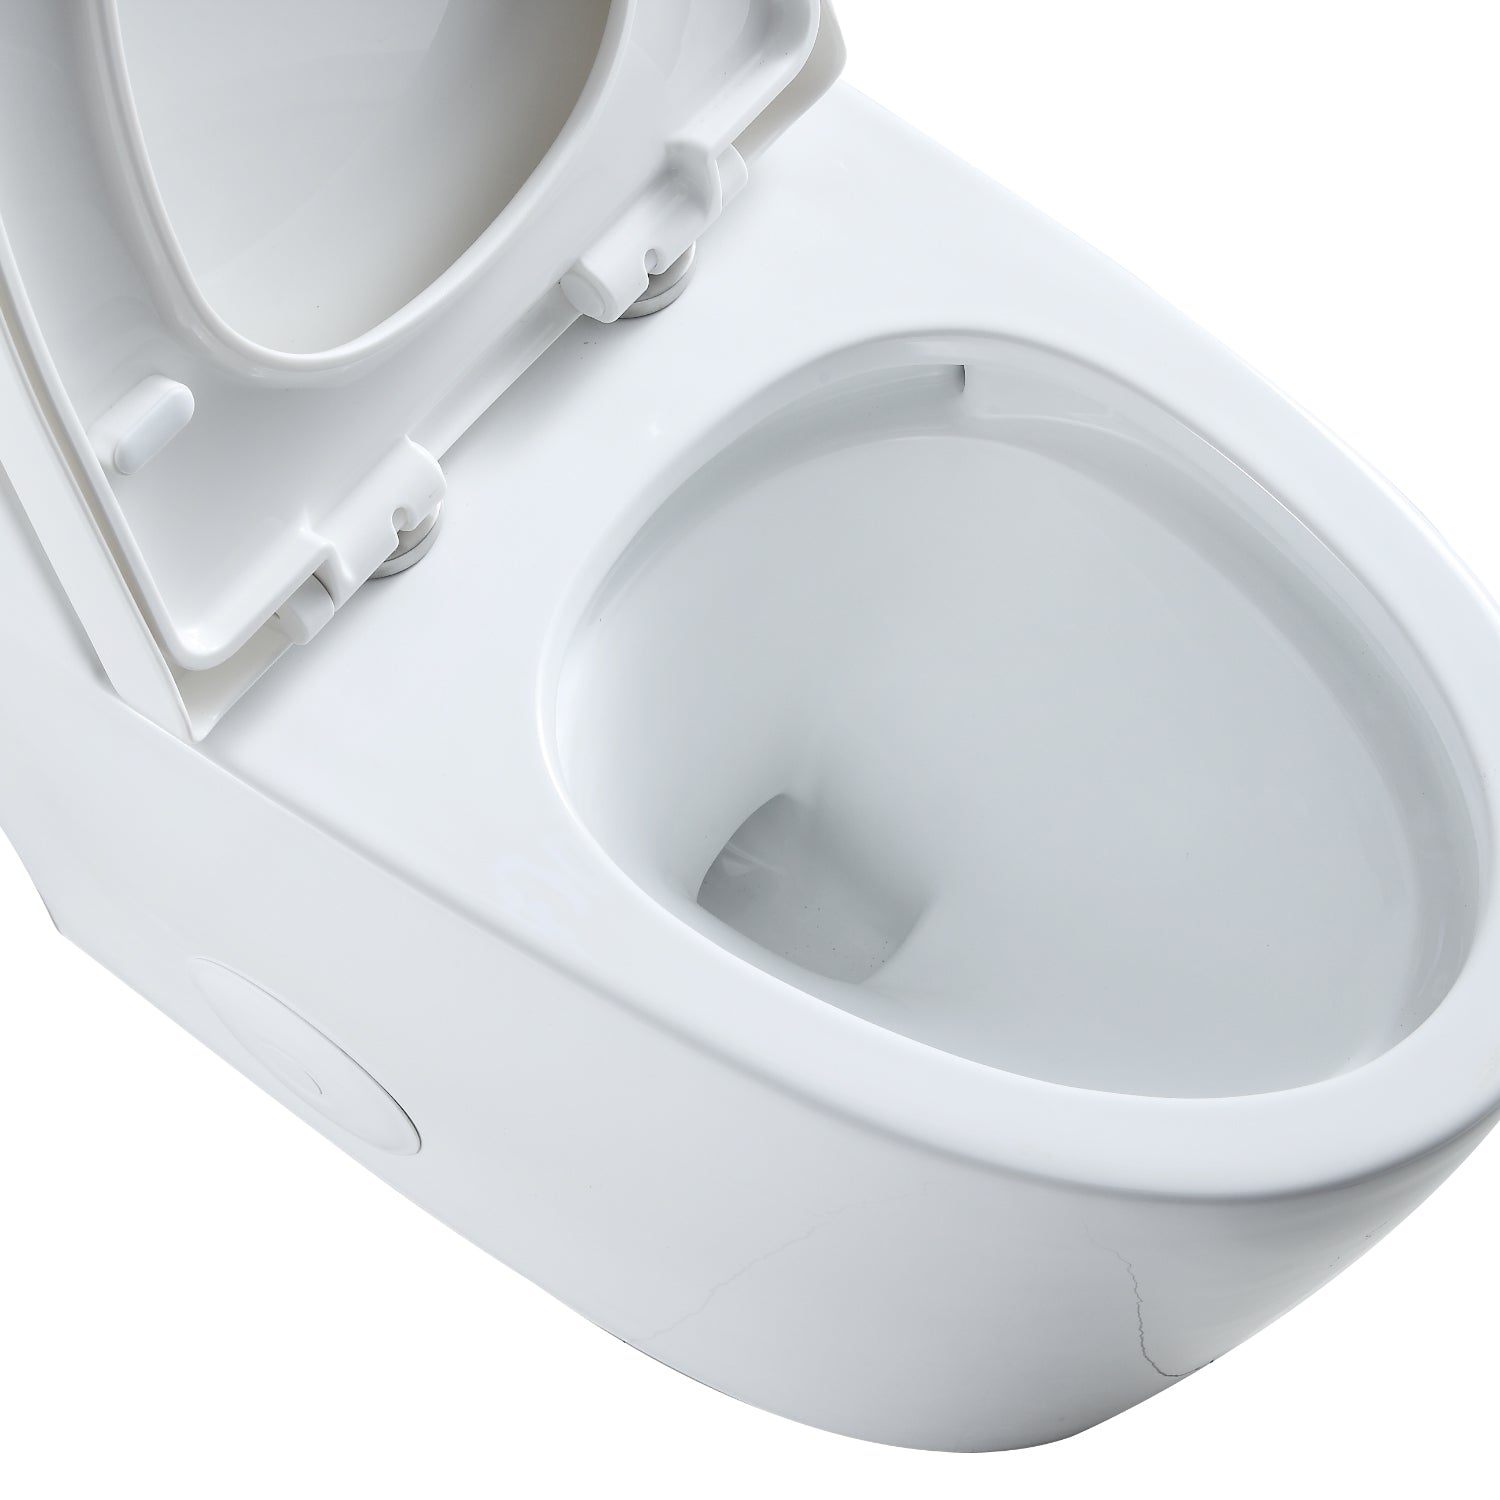 Savona Dual Flush Elongated One-Piece Toilet (Seat Included)